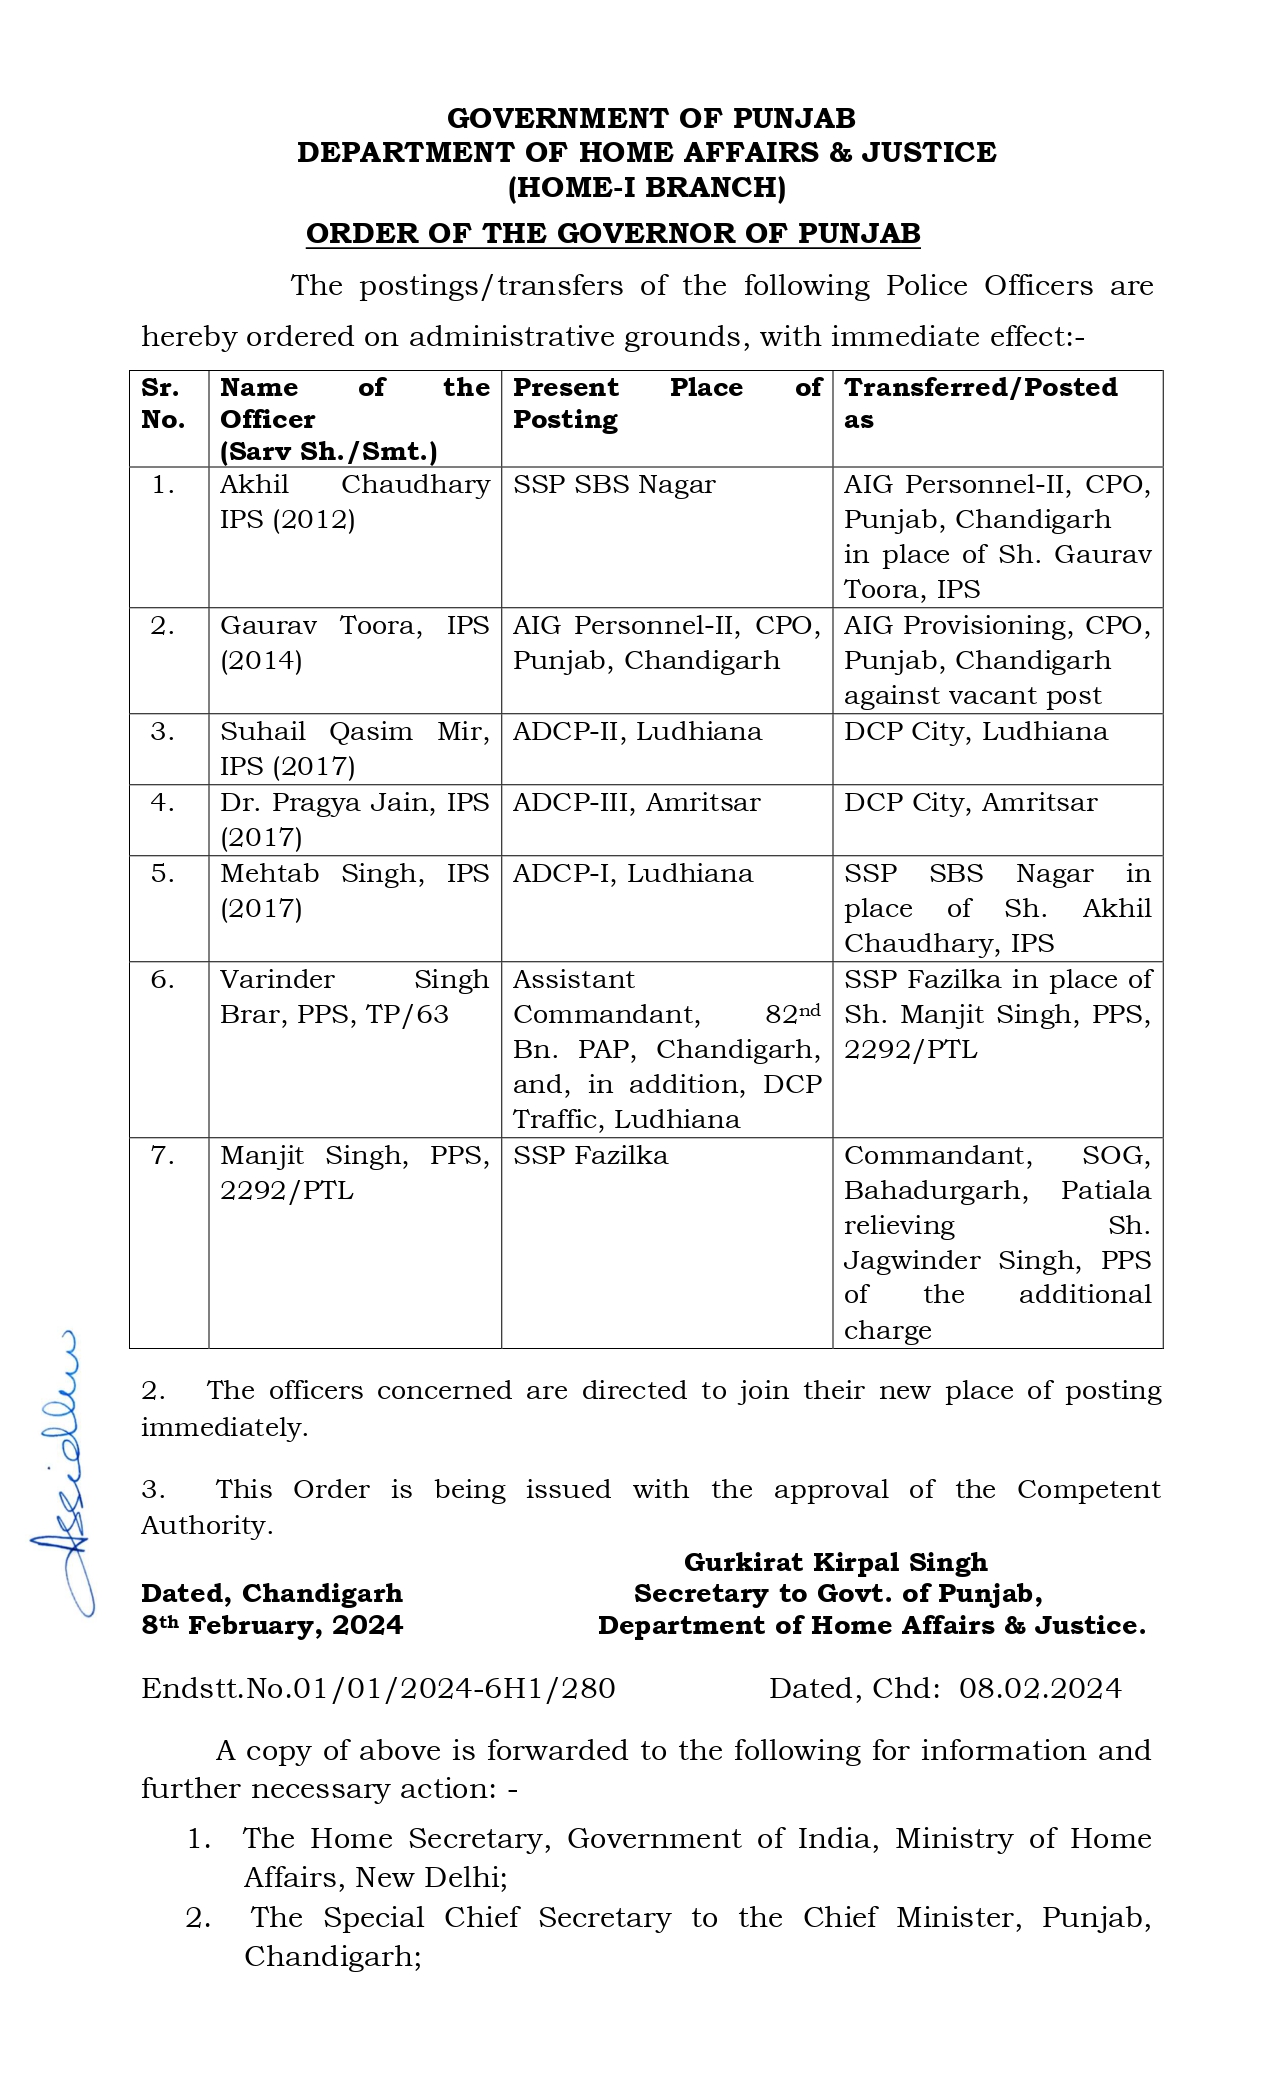 ips pps officers transferred